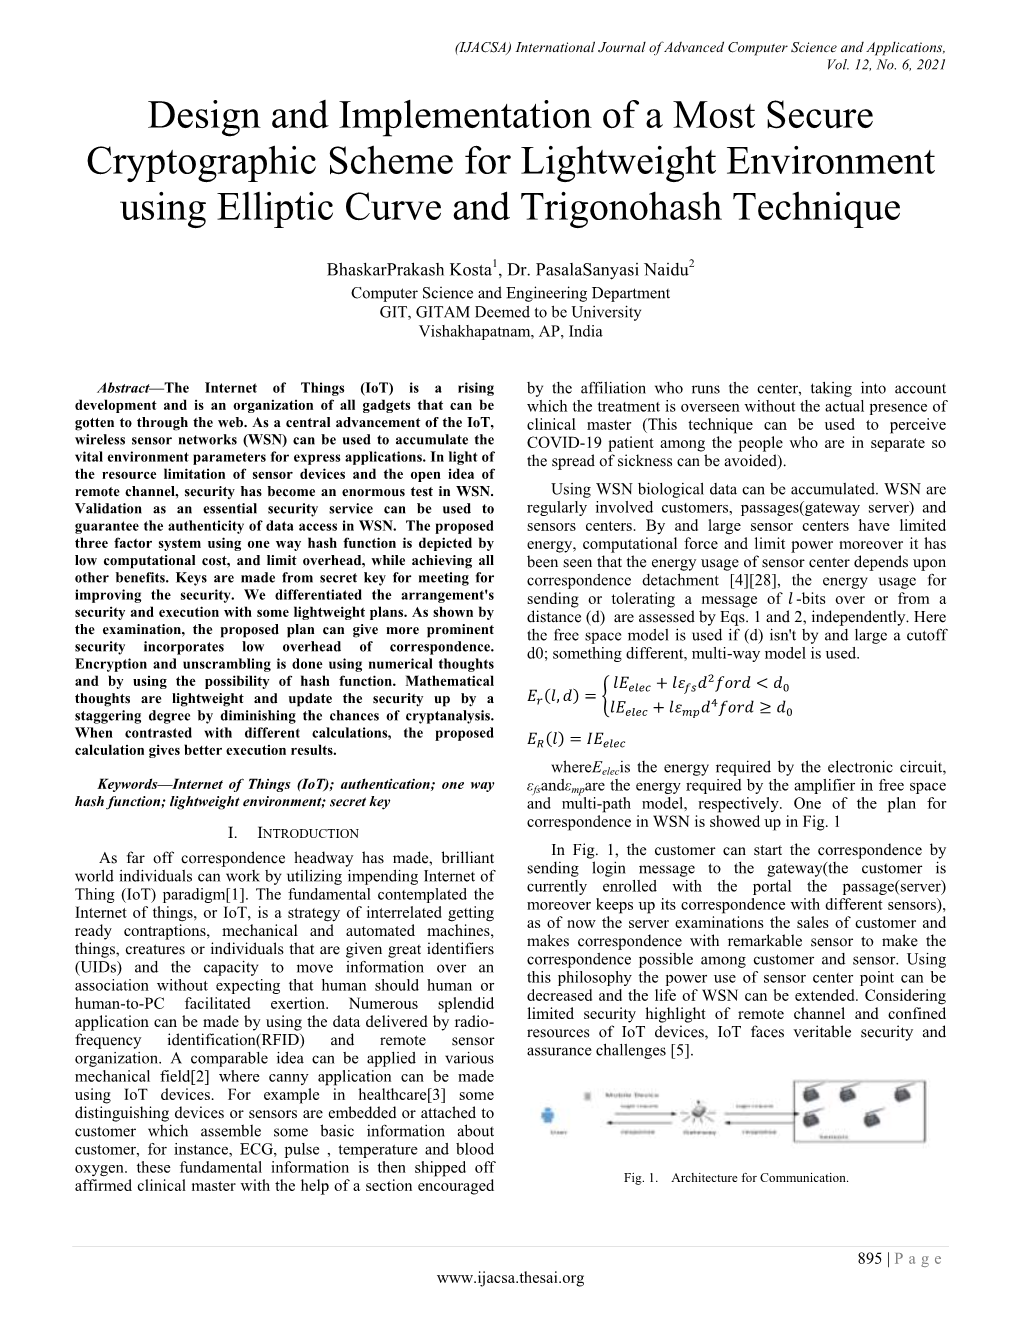 Design and Implementation of a Most Secure Cryptographic Scheme for Lightweight Environment Using Elliptic Curve and Trigonohash Technique